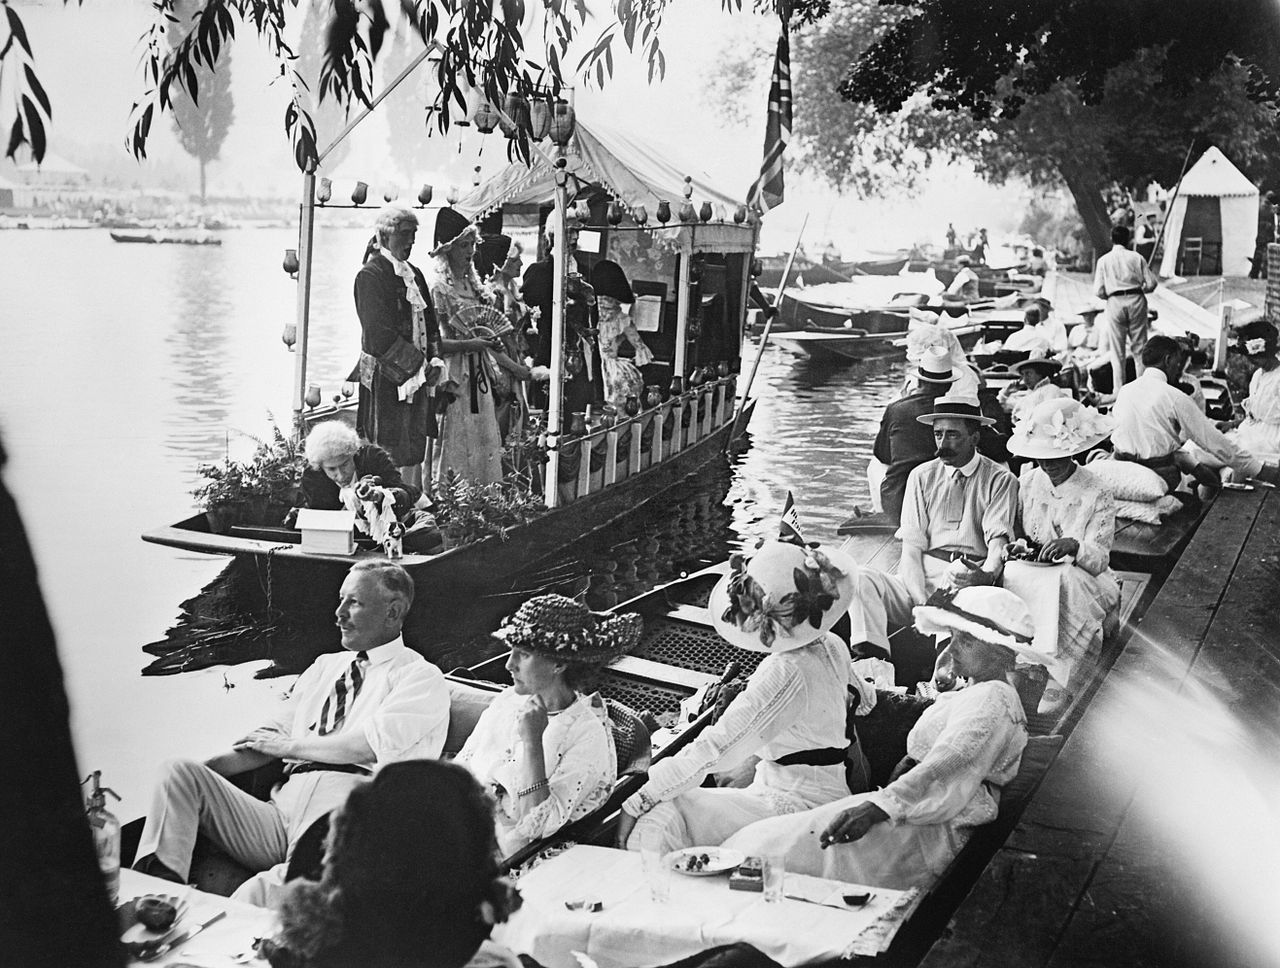 The annual summer regatta at Henley on the River Thames shortly before the outbreak of the First World War